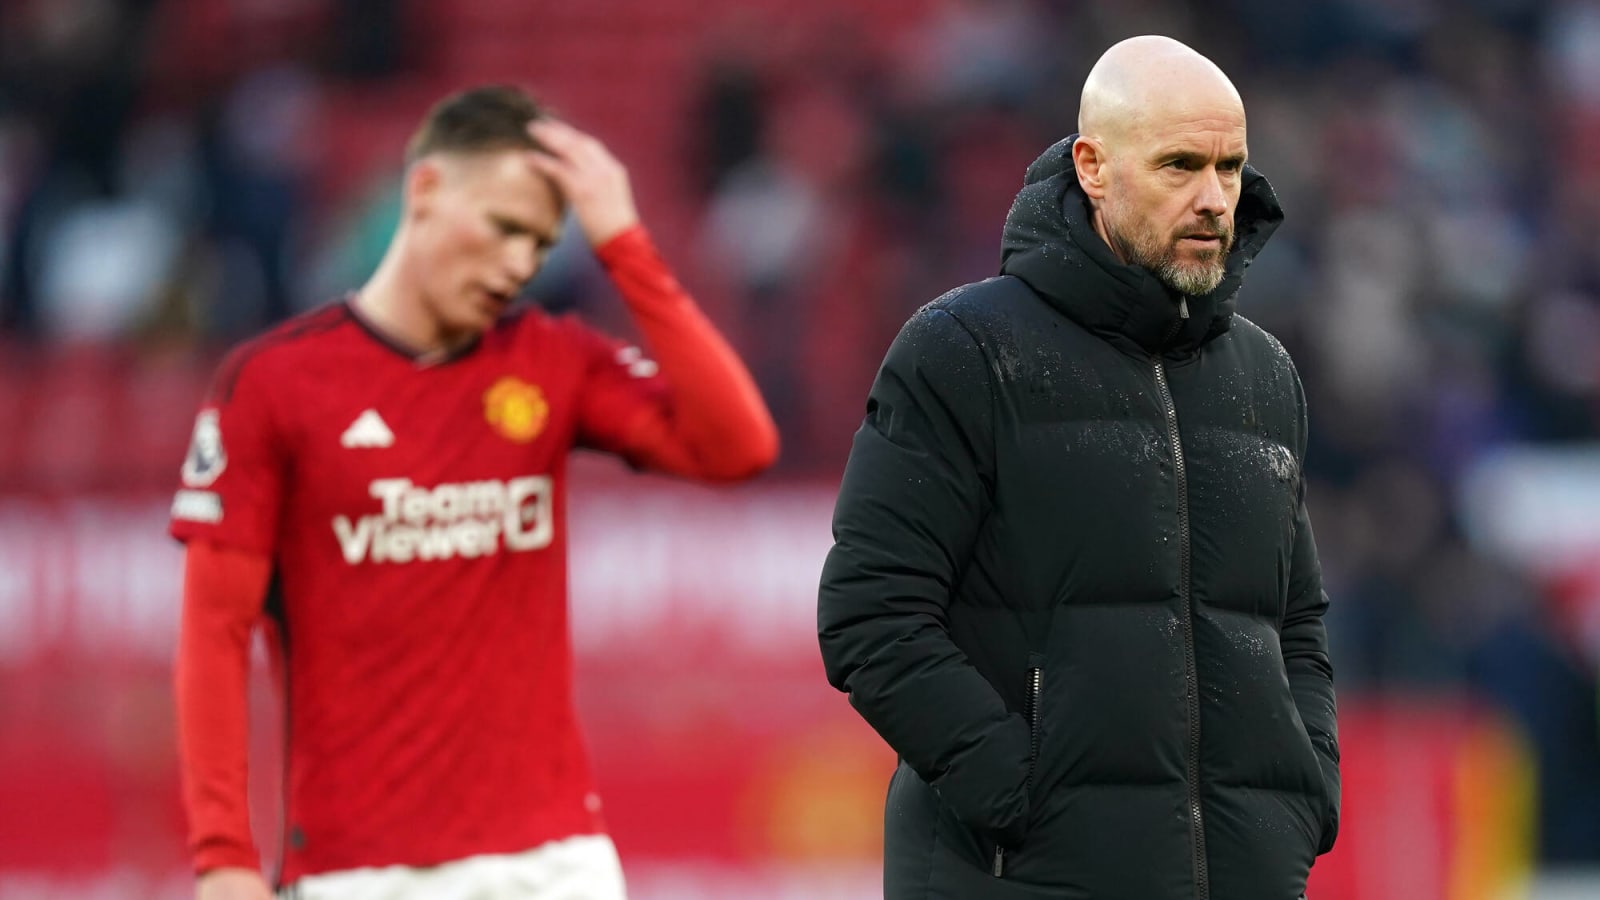 'We let them escape' – Erik ten Hag disappointed Man United players didn’t stop late Fulham winner